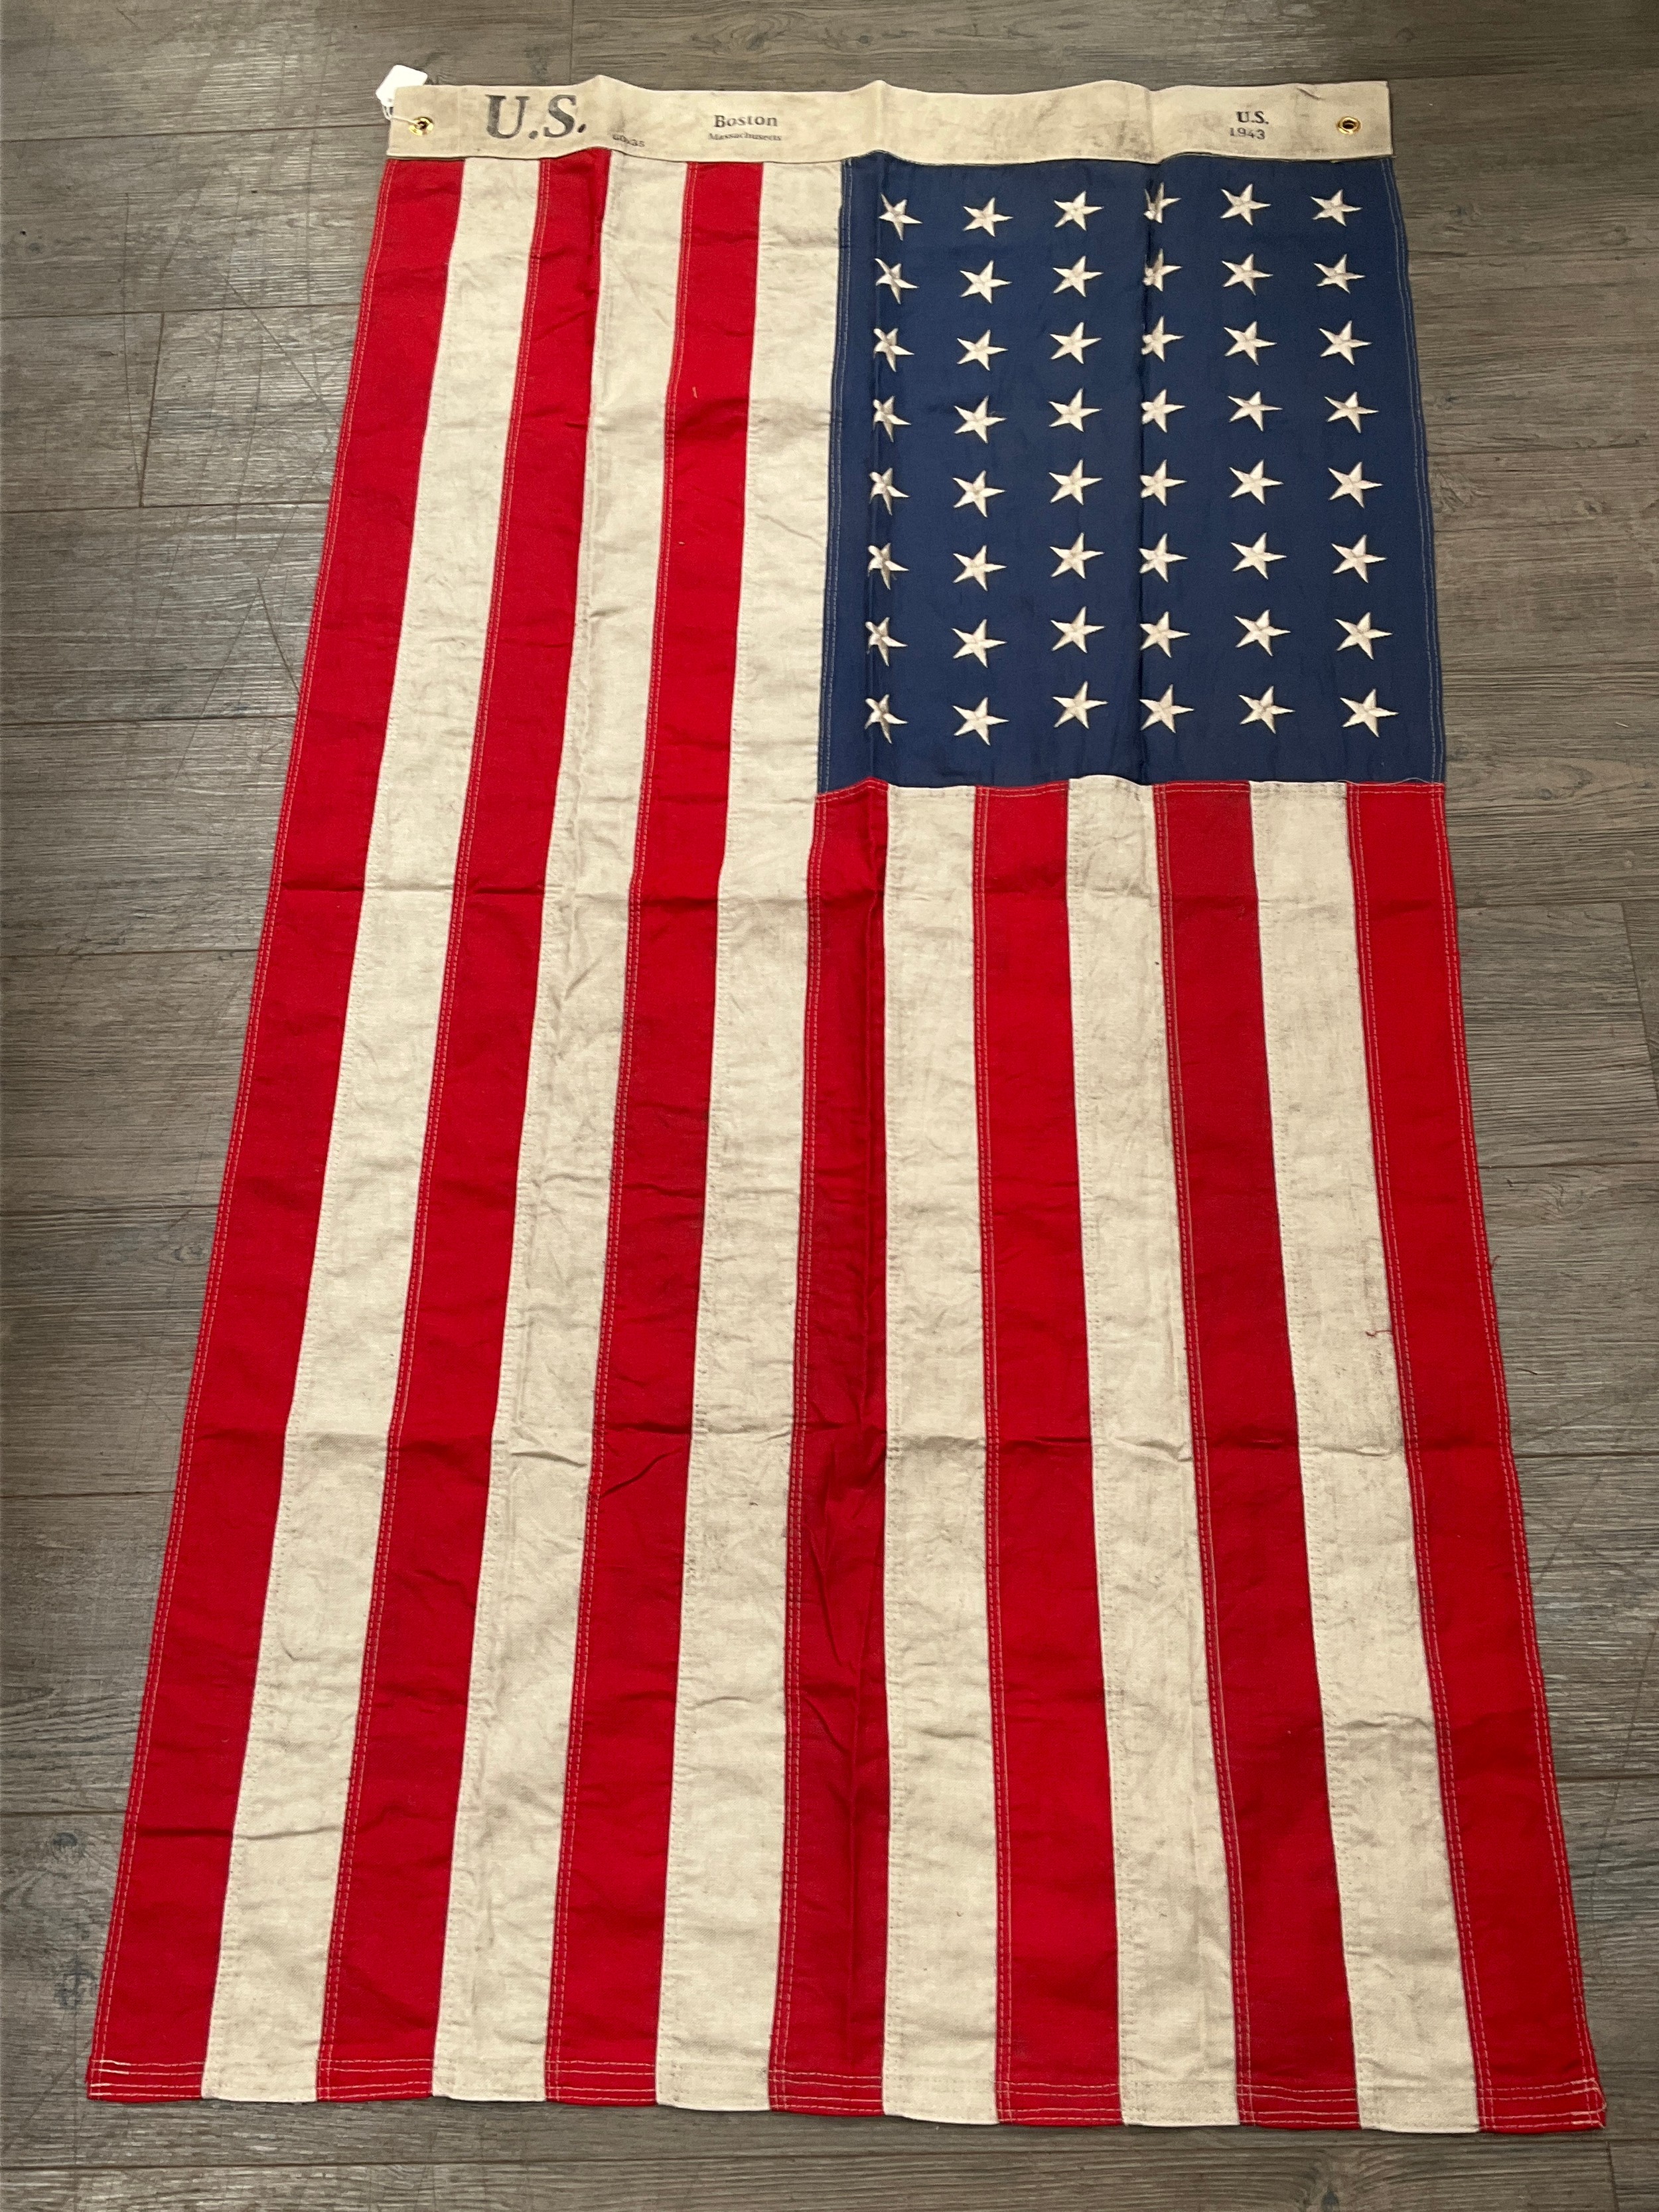 A reproduction US flag bearing 1943 date